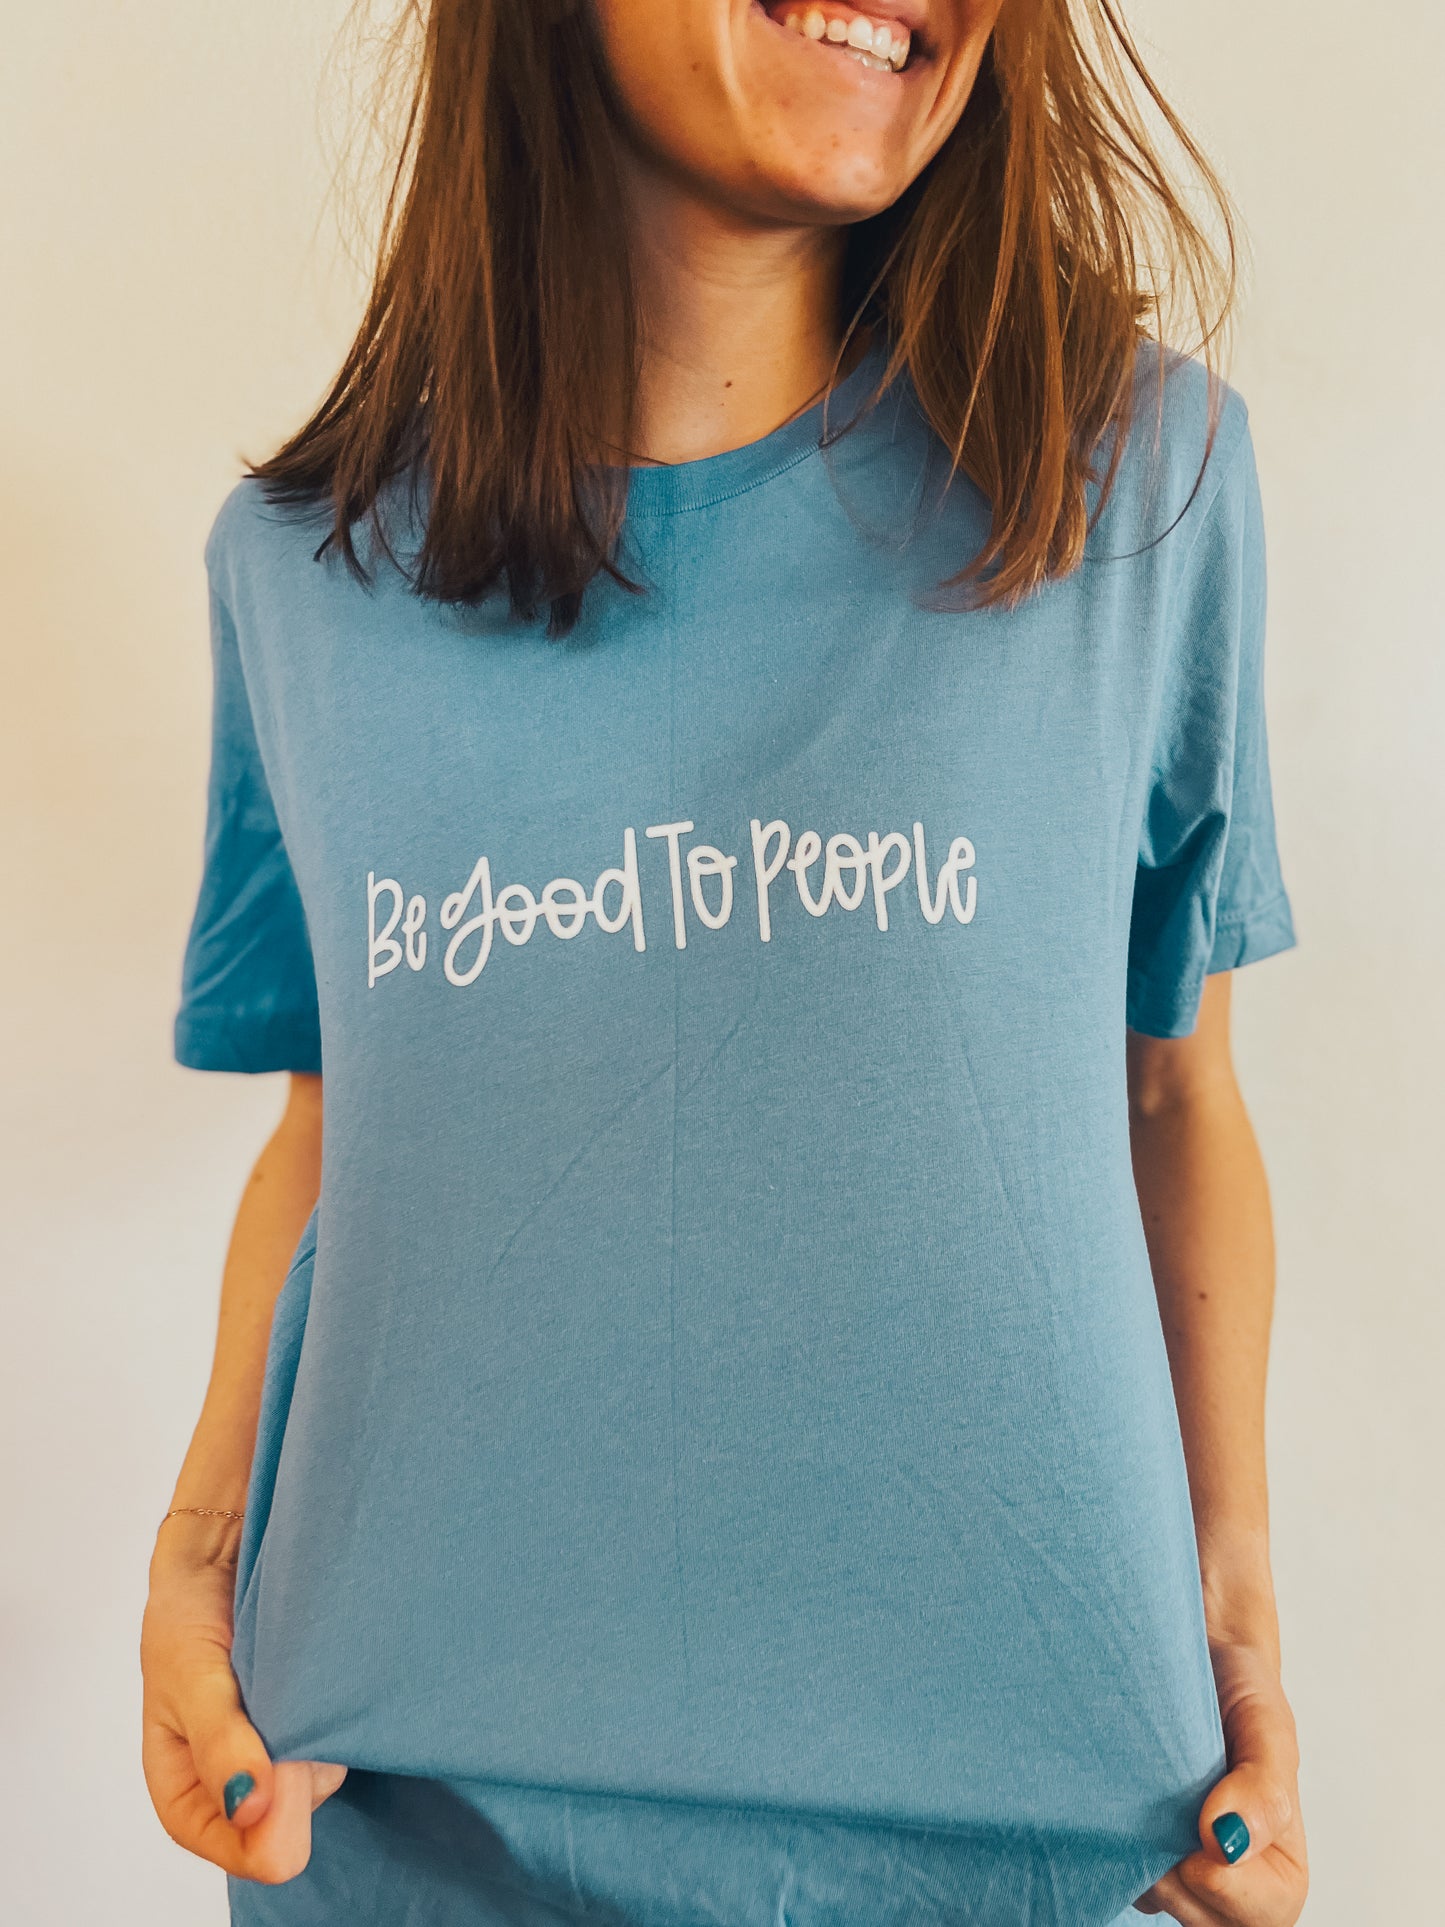 Be good to people Tee.